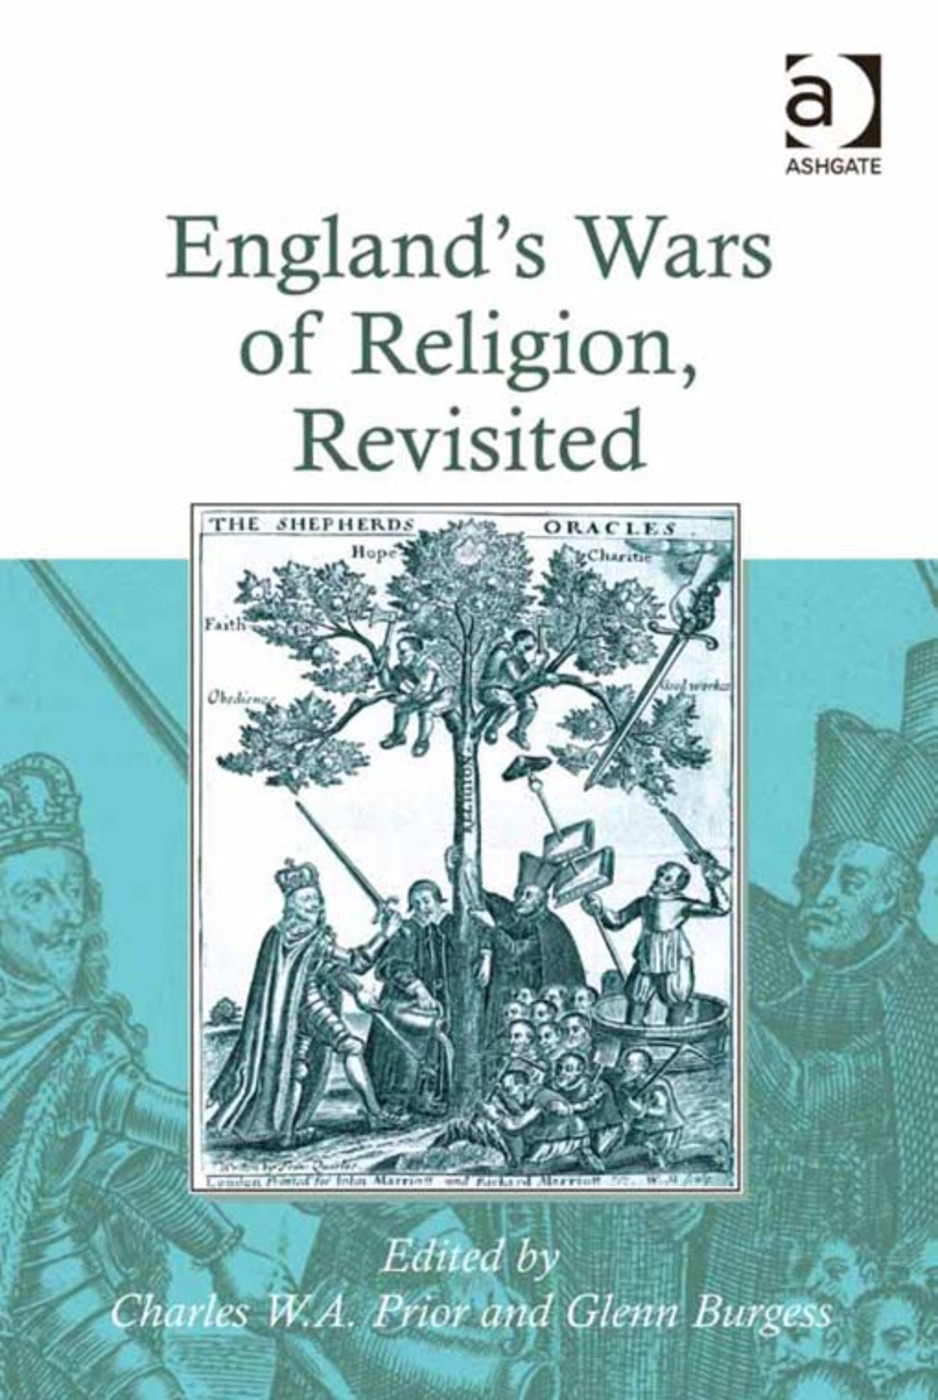 England’s Wars of Religion, Revisited. Charles W.A. Prior and Glenn Burgess